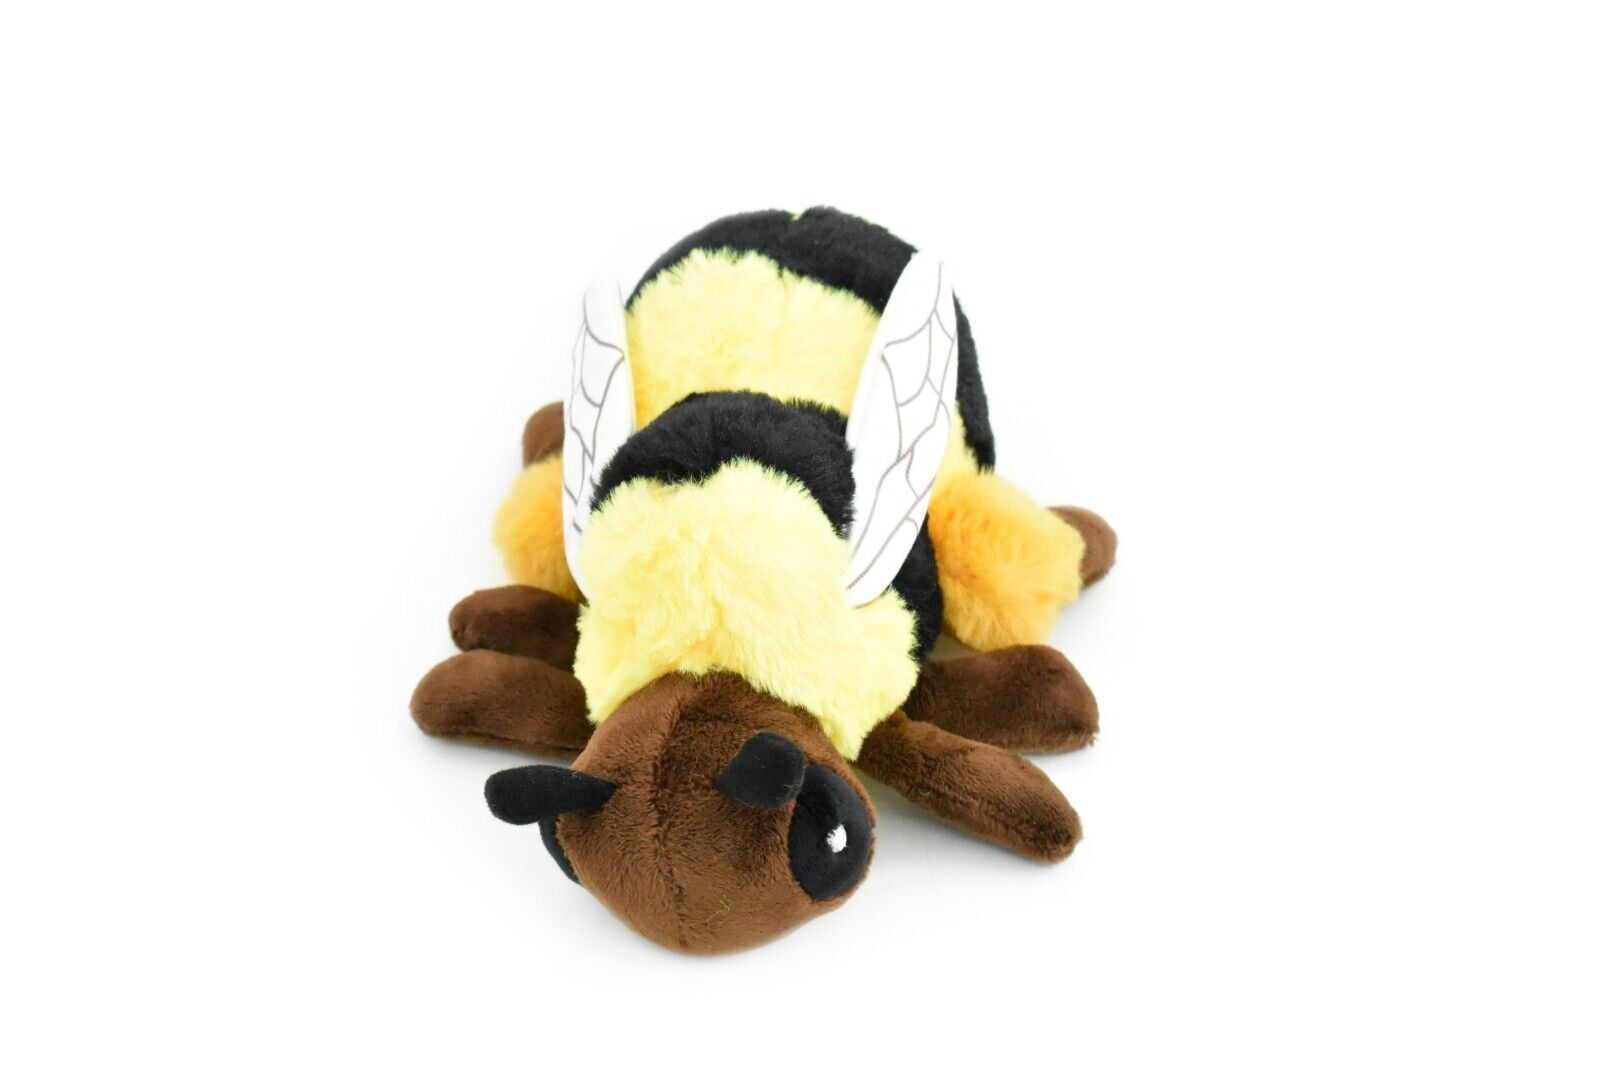 Bumblebee, Bumble Bee, Honey Bee, Large Rubber Toy, Realistic Figure 5.5  F7051